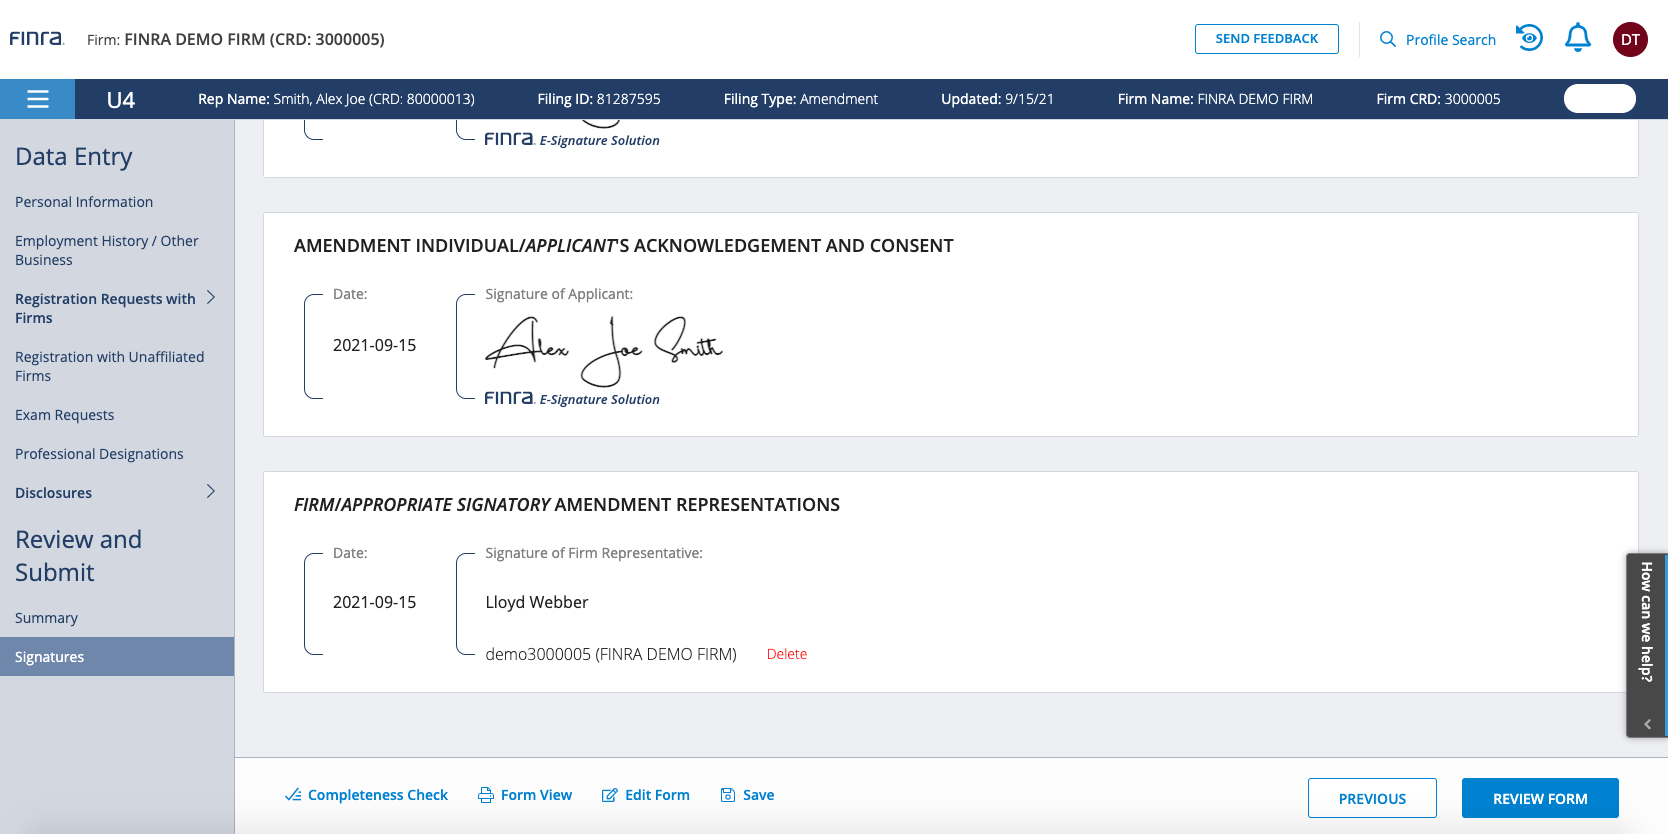 Firm Settings Guide: Opening the Form View of the Signed Filing